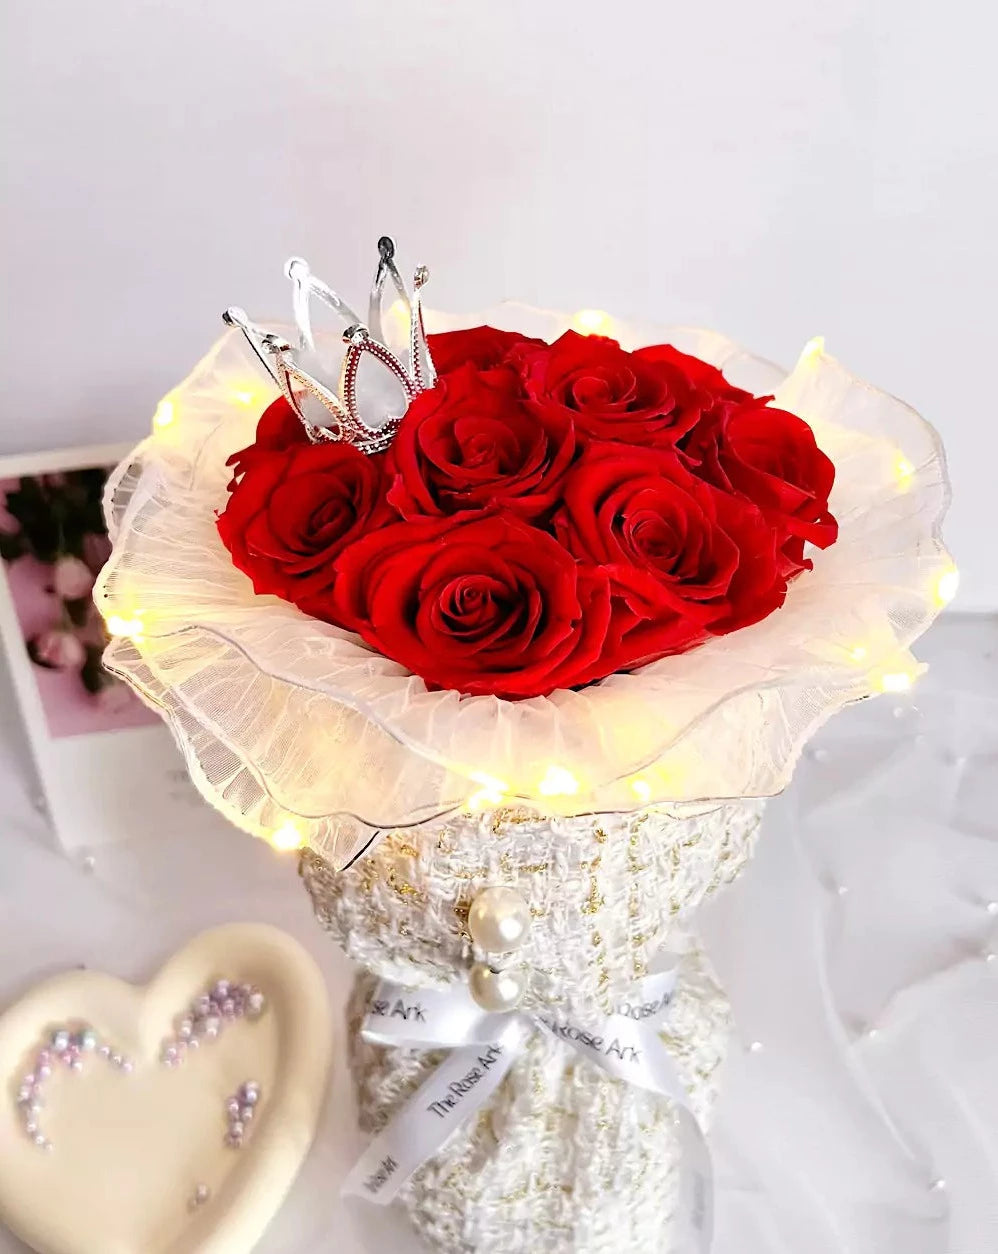 11 Stalks Preserved Red Rose Bouquet in White Tweed Fabric The Rose Ark